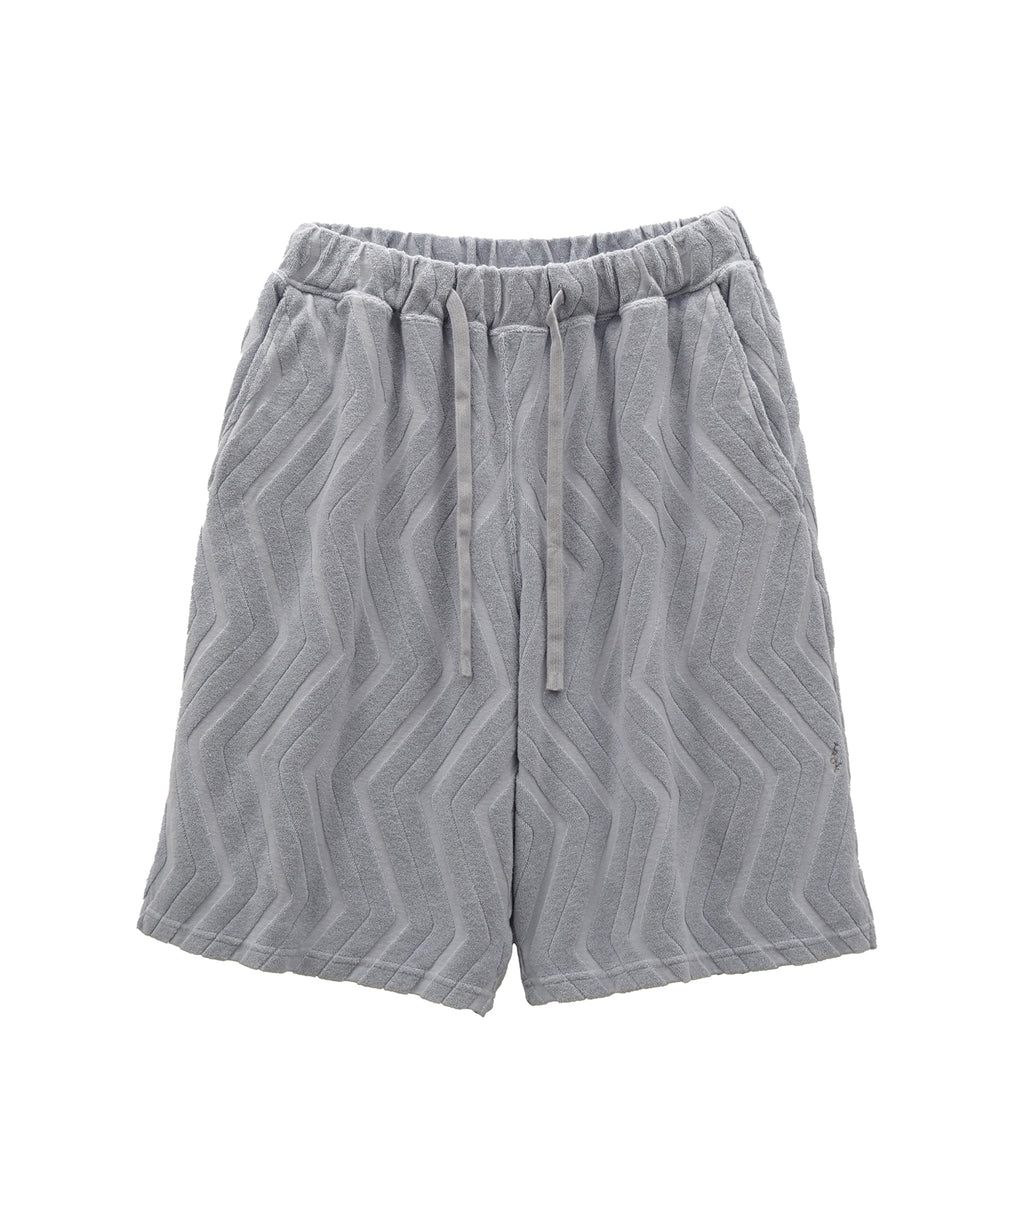 TROVE / DUNE PILE EASY SHORTS / BLUE GRAY